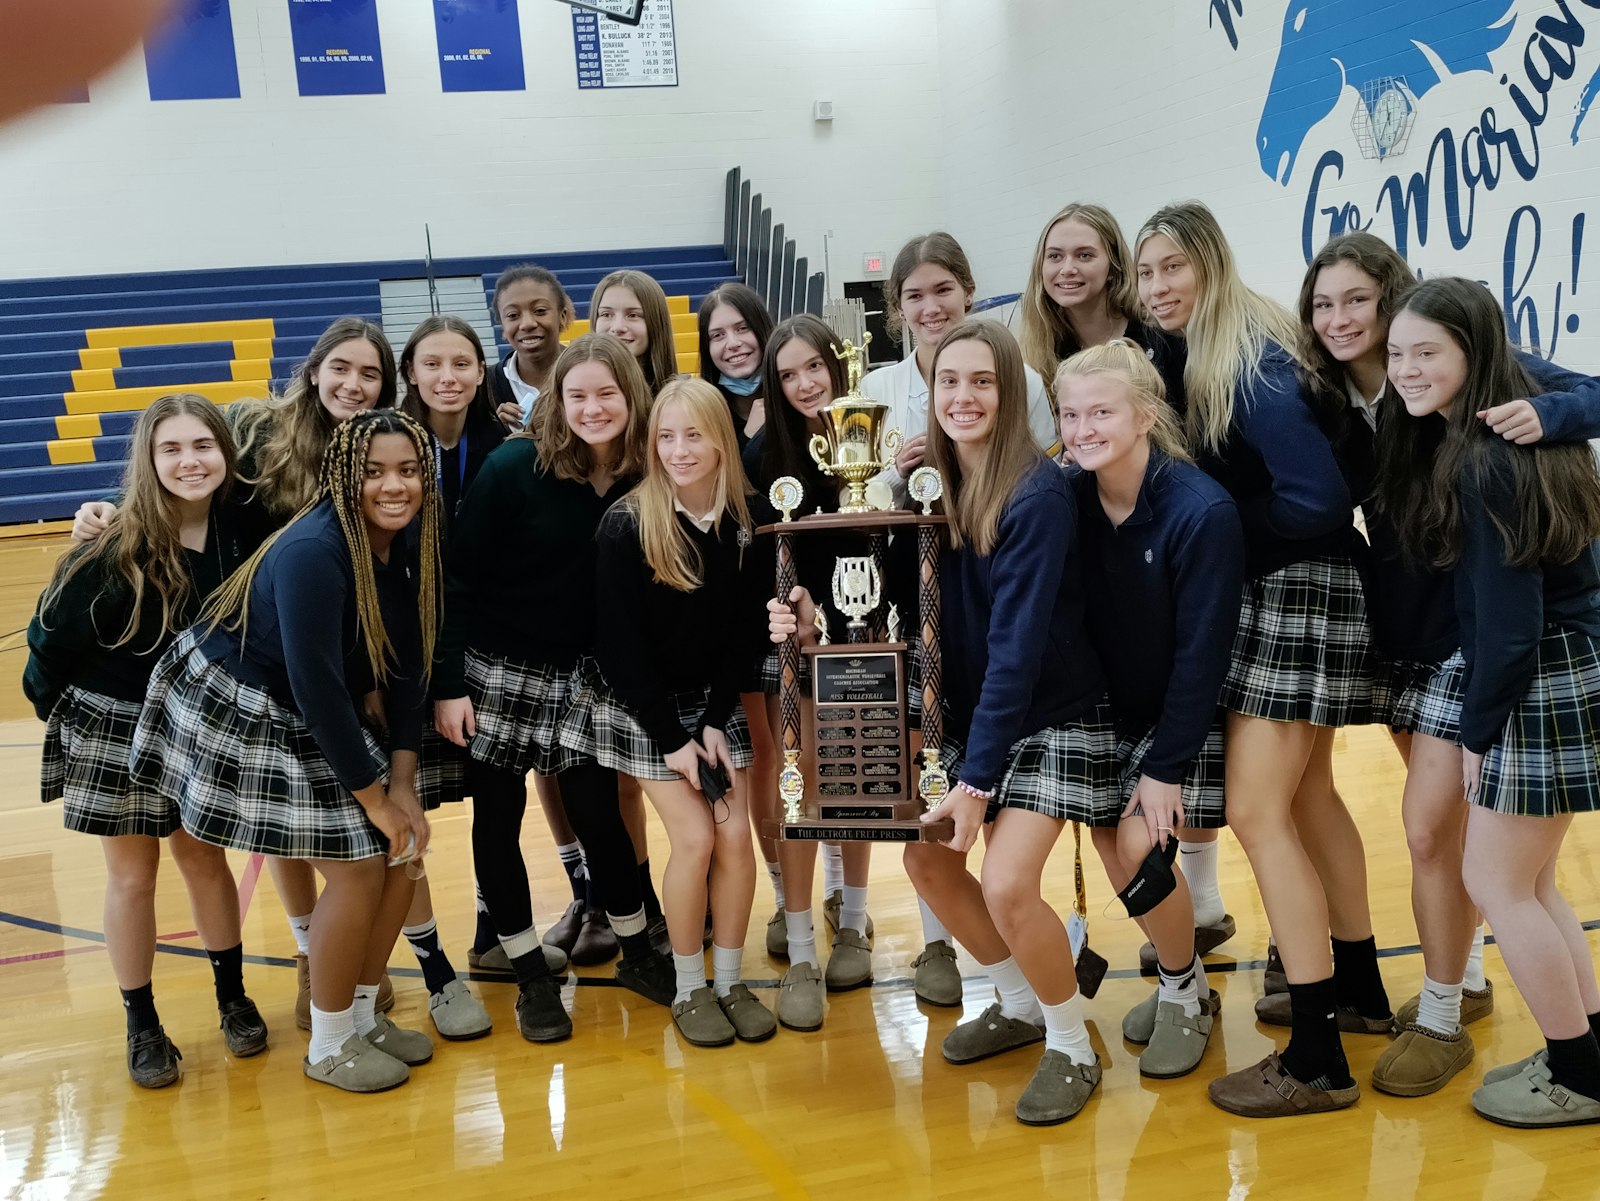 Ava Brizard’s teammates celebrate her winning the 2021 Miss Volleyball award. They are on the threshold of repeating as Division 1 state champion. The Mustangs have a semi-final match at 4:30 p.m. Thursday against Hudsonville.